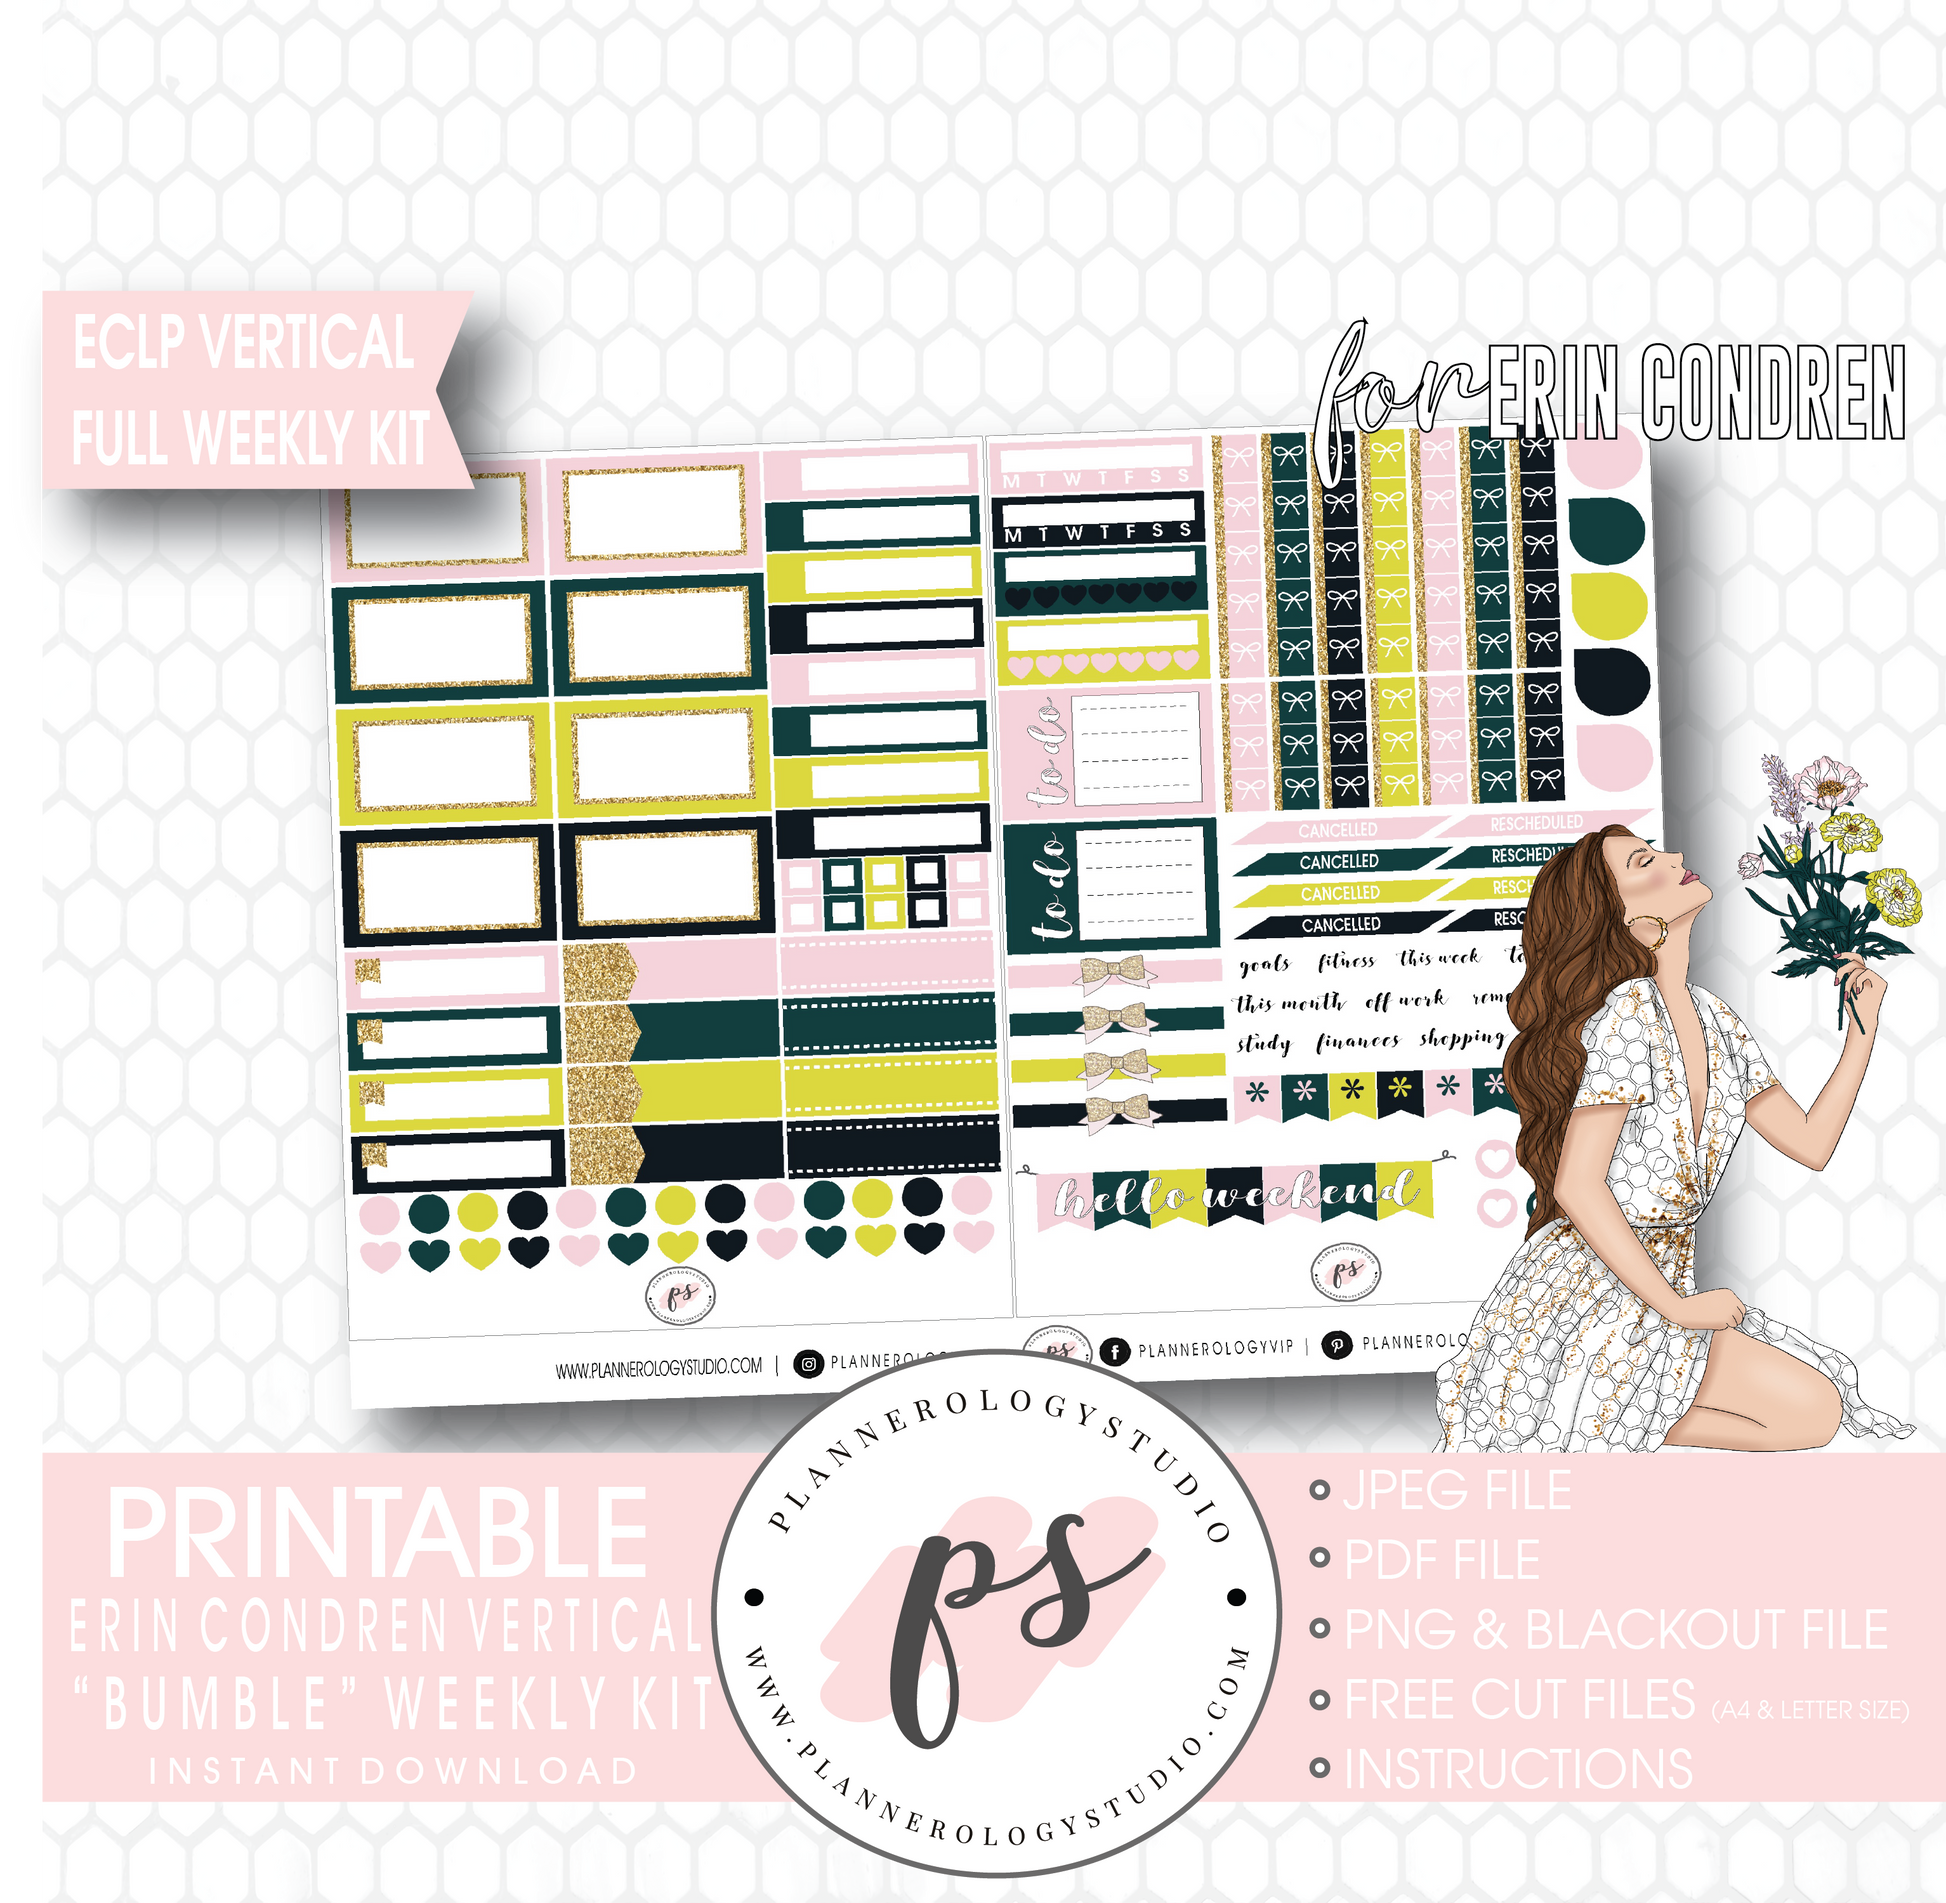 Bumble Full Weekly Kit Printable Planner Digital Stickers (for use with Erin Condren Vertical) - Plannerologystudio